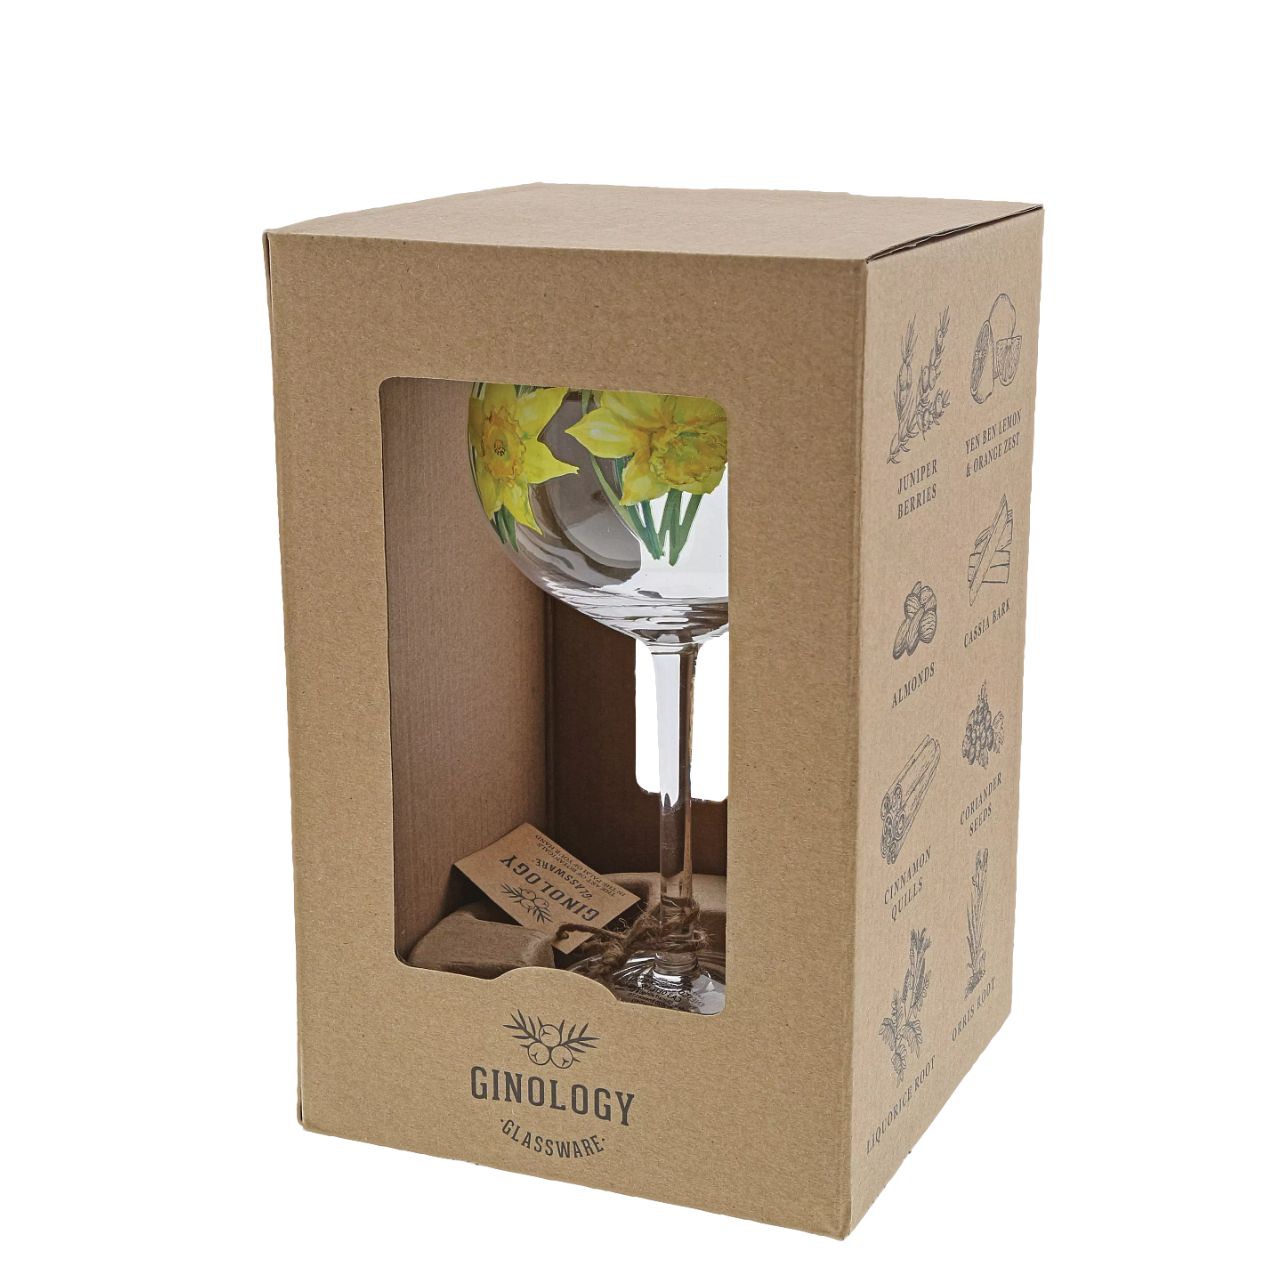 Copa Daffodil Gin Glass  The Daffodil gin glass is ideal for celebrating a new path. Daffodils signify the beginning of springtime, they represent rebirth and new beginnings, and so, they are the perfect gift to help someone special celebrate new achievements and goals. Pair with a fresh lemon gin and tonic for a refreshing gift.